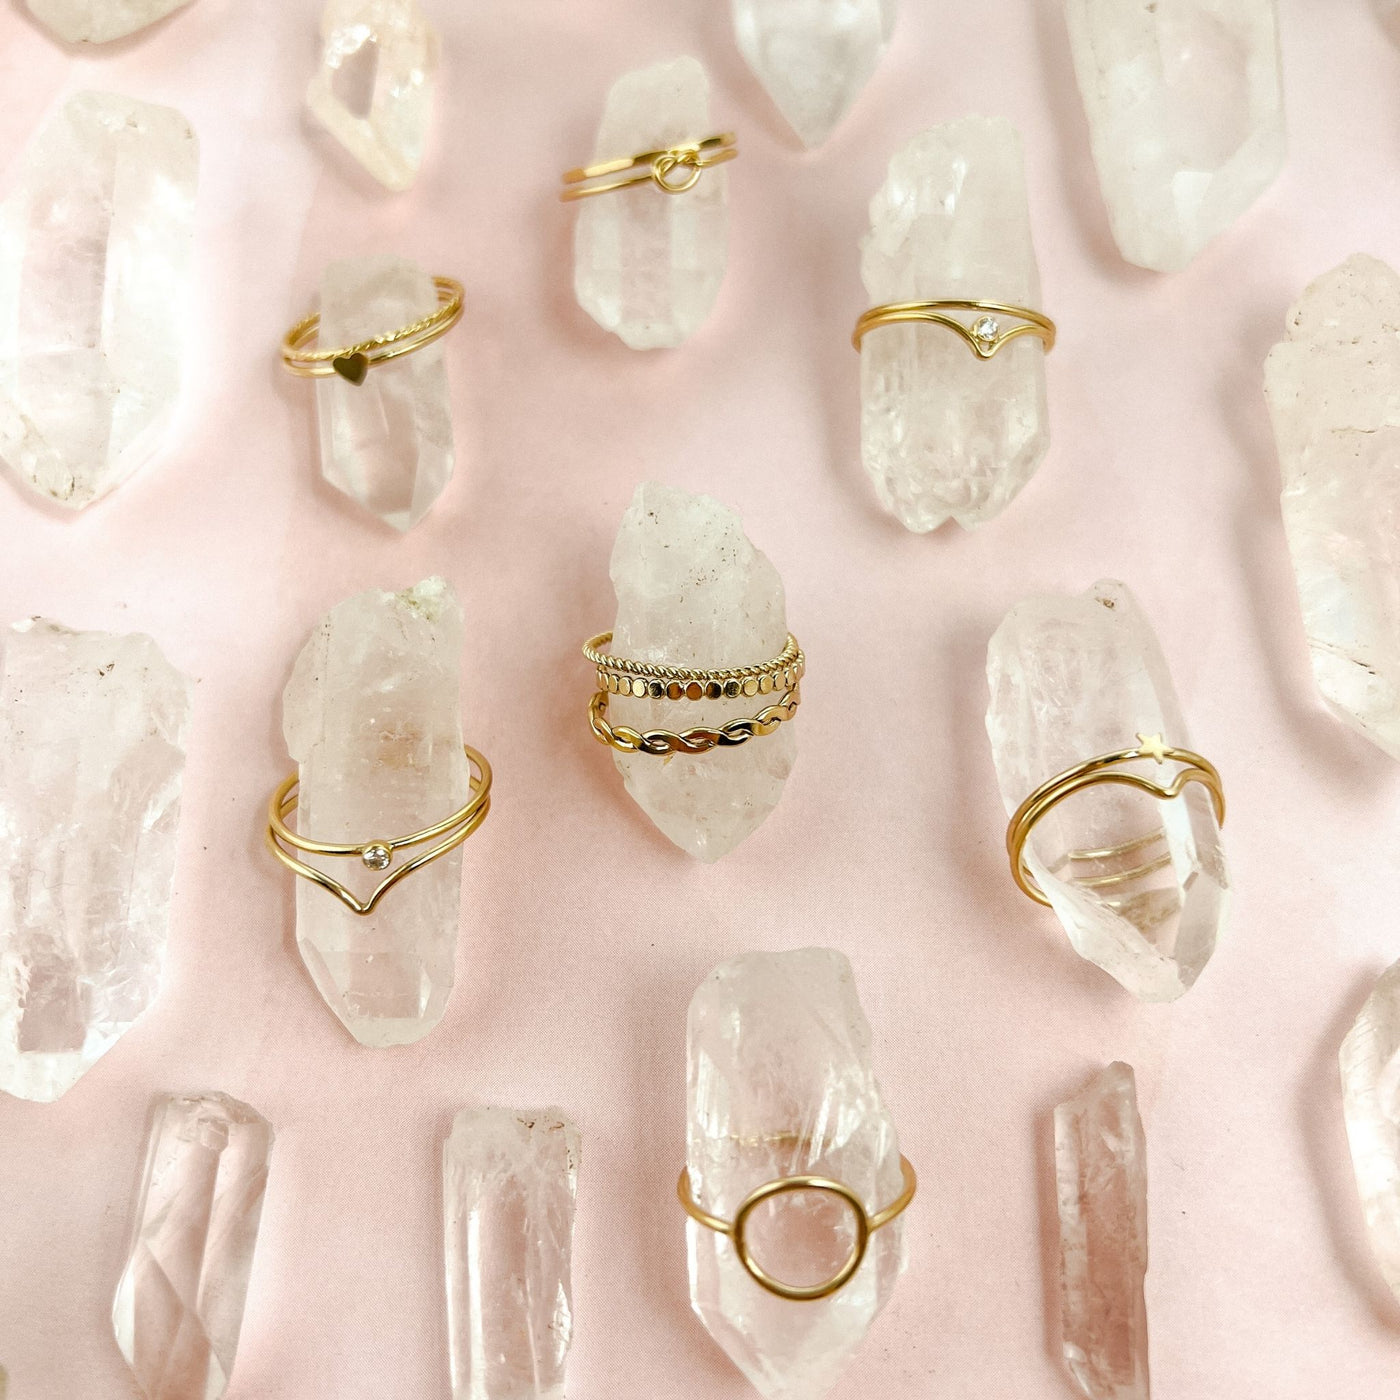 Assortment of 12 minimalist 14KGF stacking rings displayed on  quartz crystal points